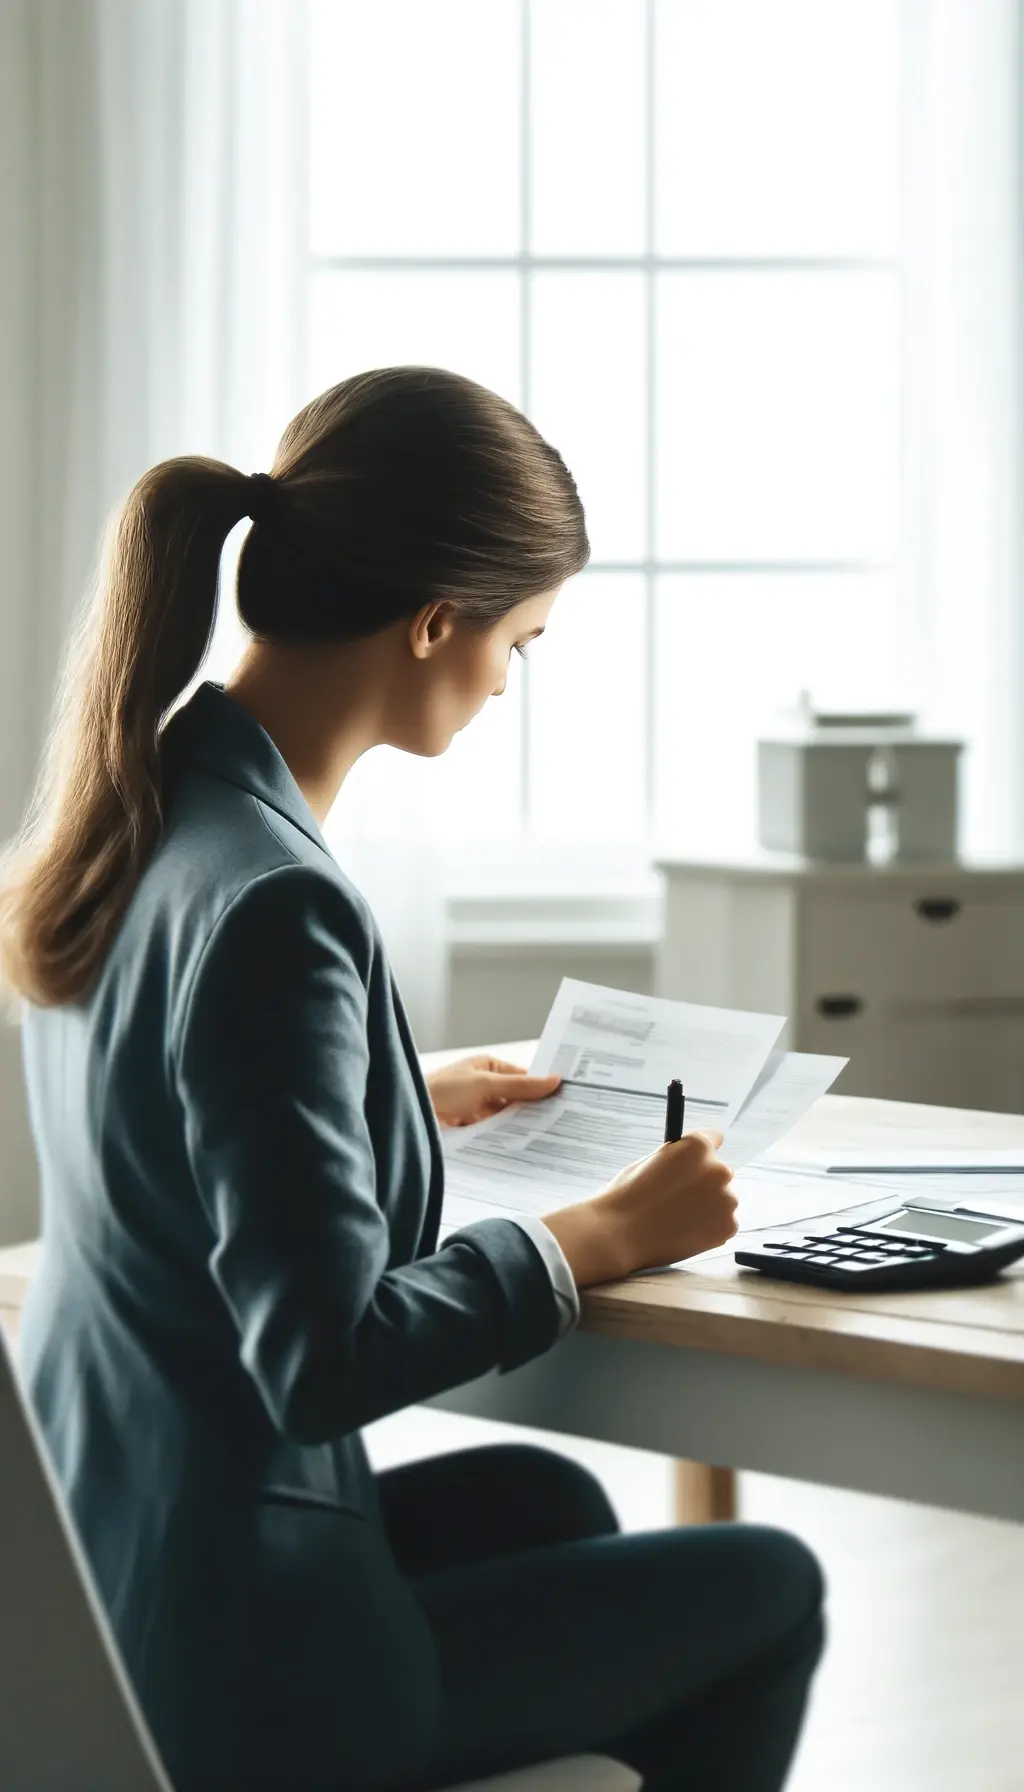 A realistic portrait-format photo of a woman from behind, filling out her tax forms. The scene should be set in a home office environment, with the wo